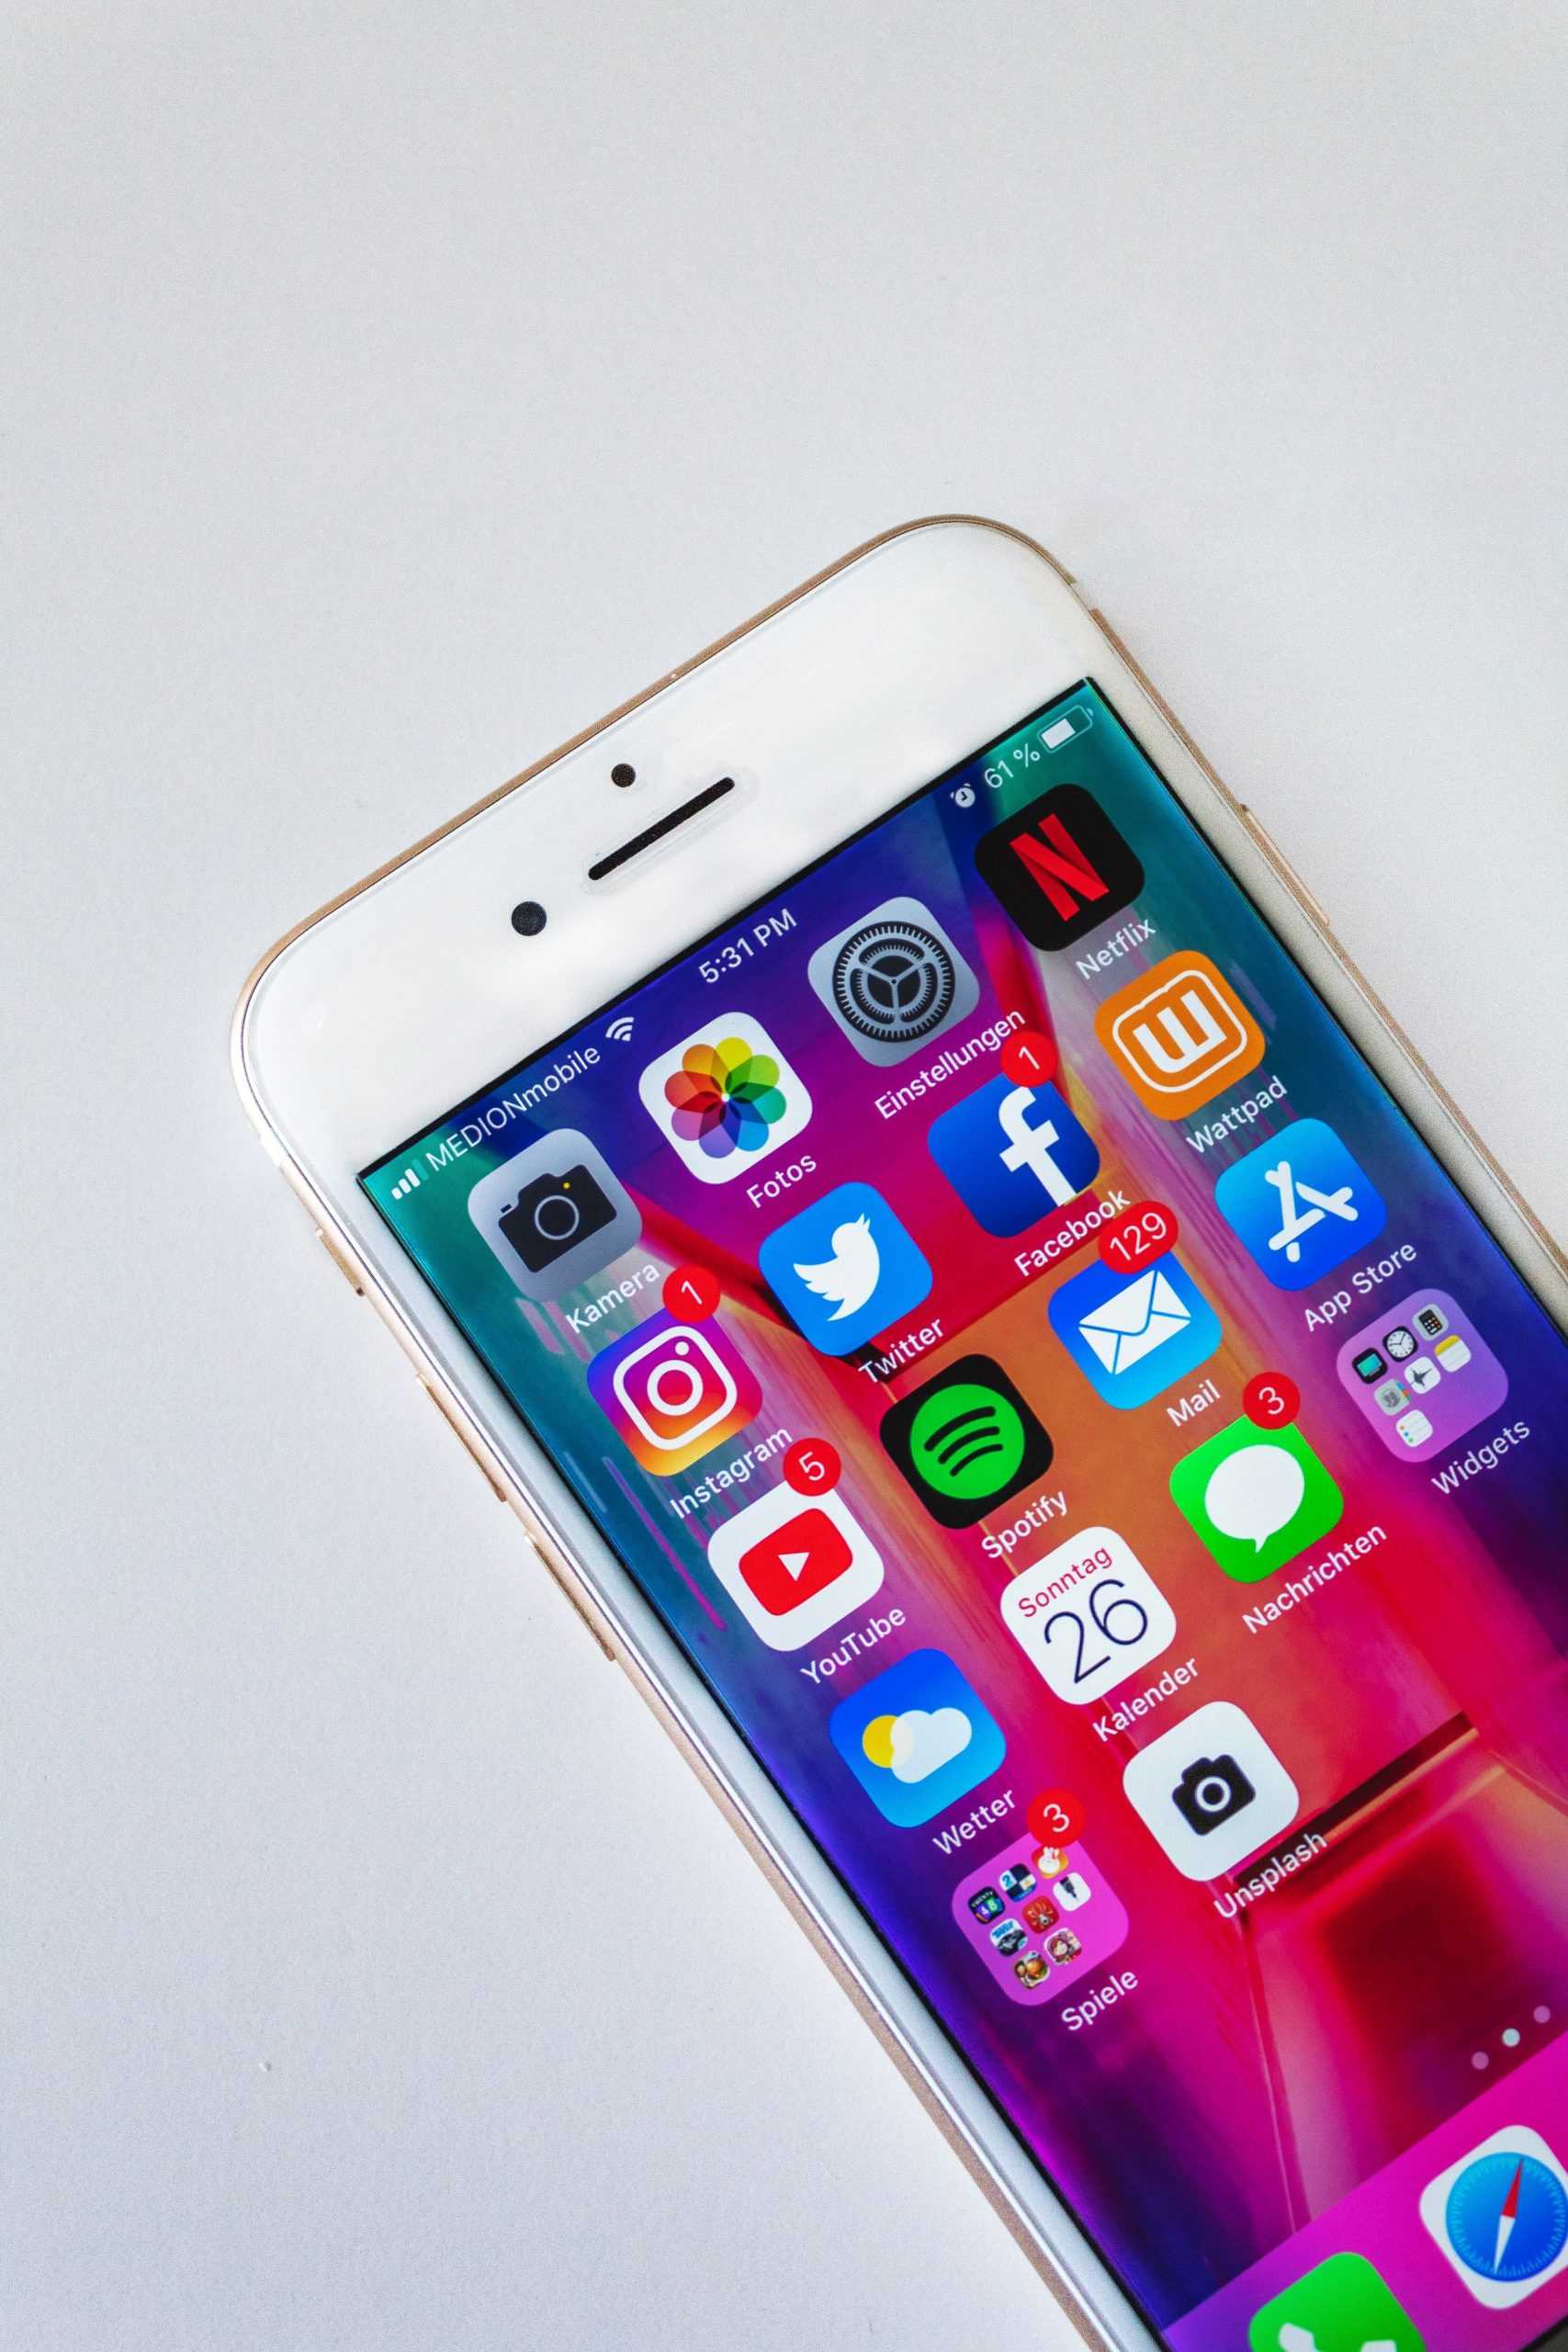 I Tried Deleting All My Social Media Apps, and This Is What Happened